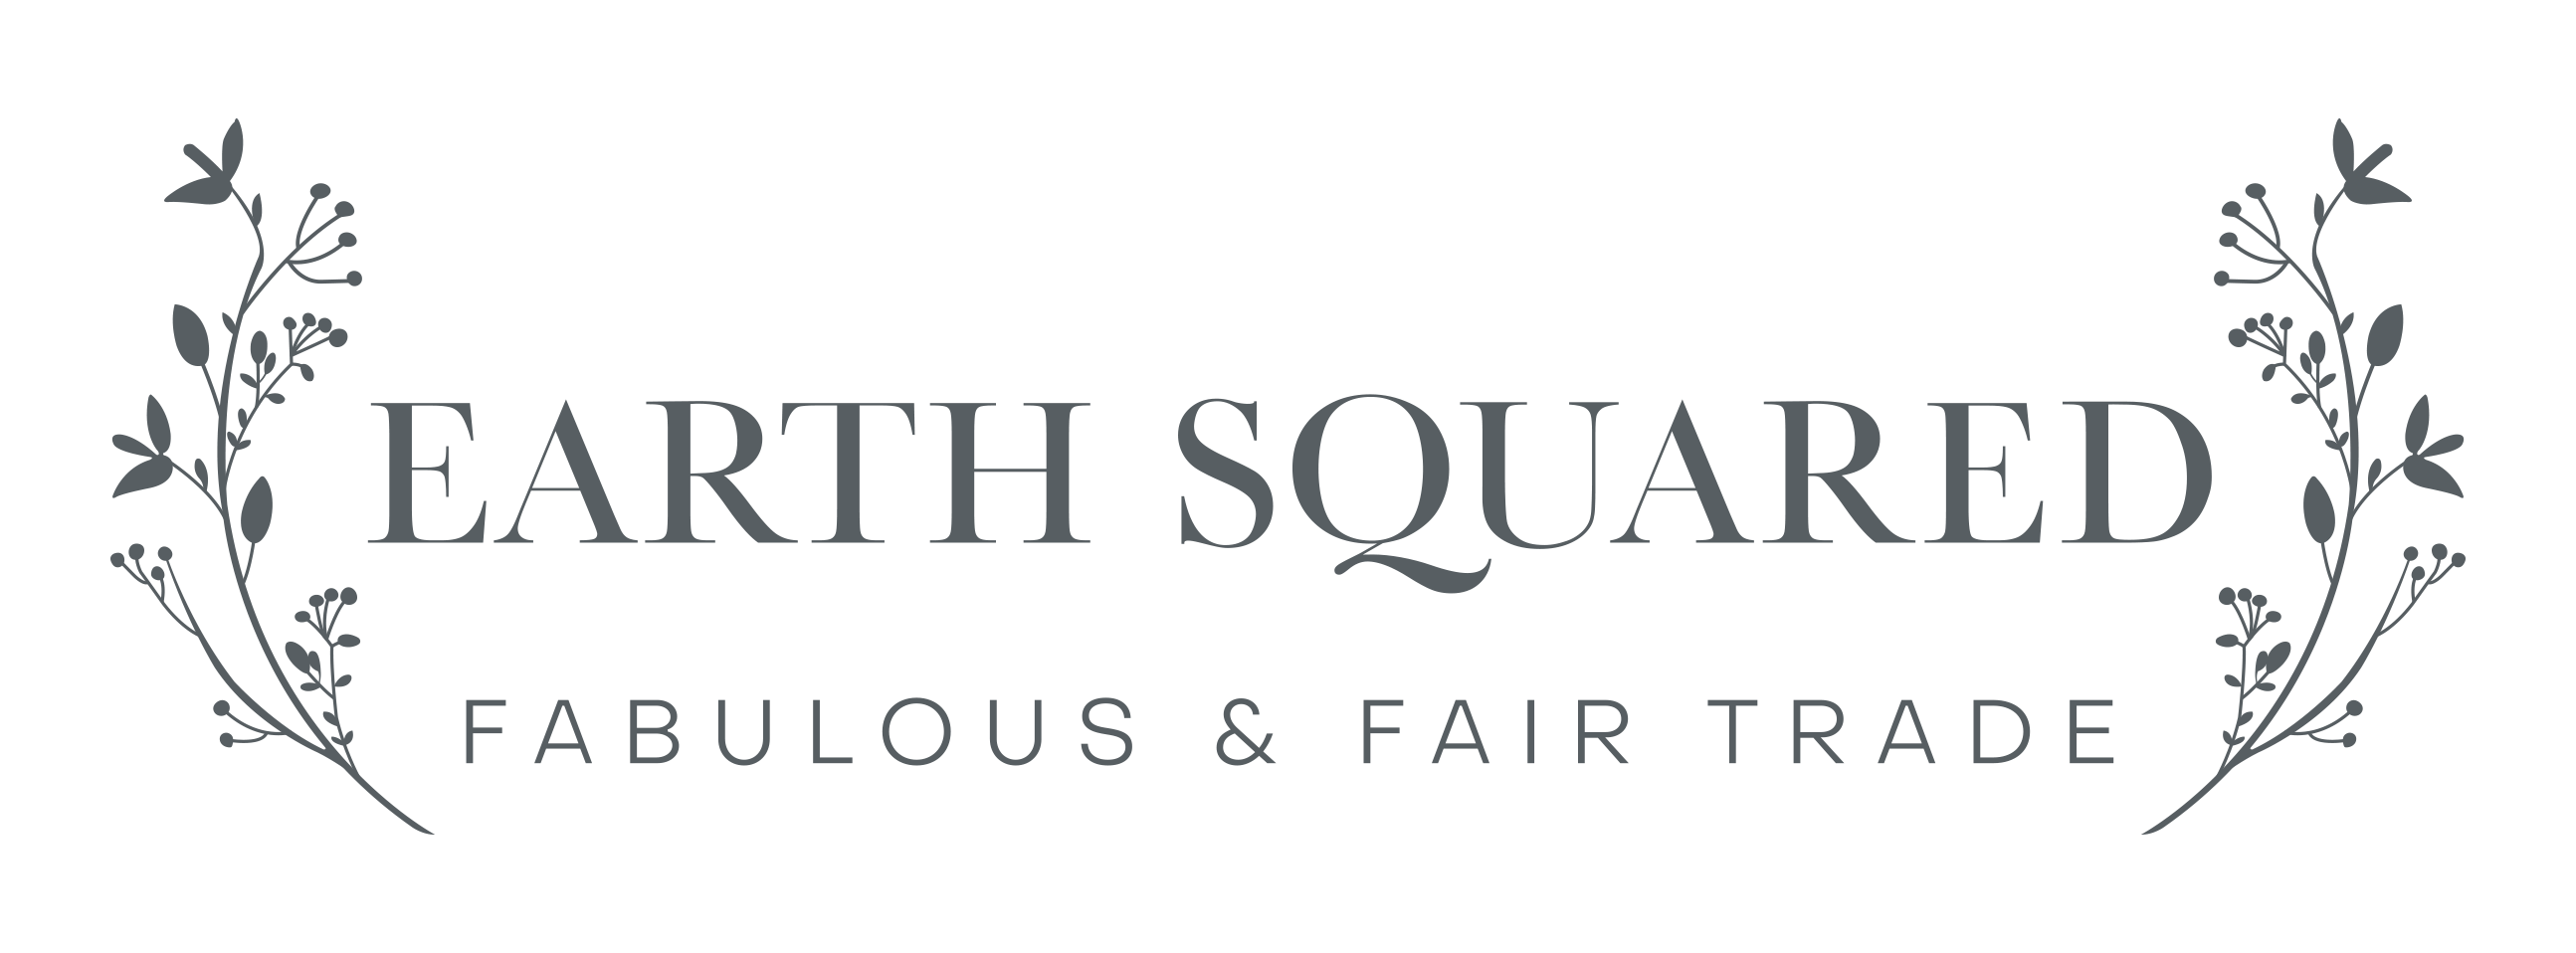 logo for Earth Squared